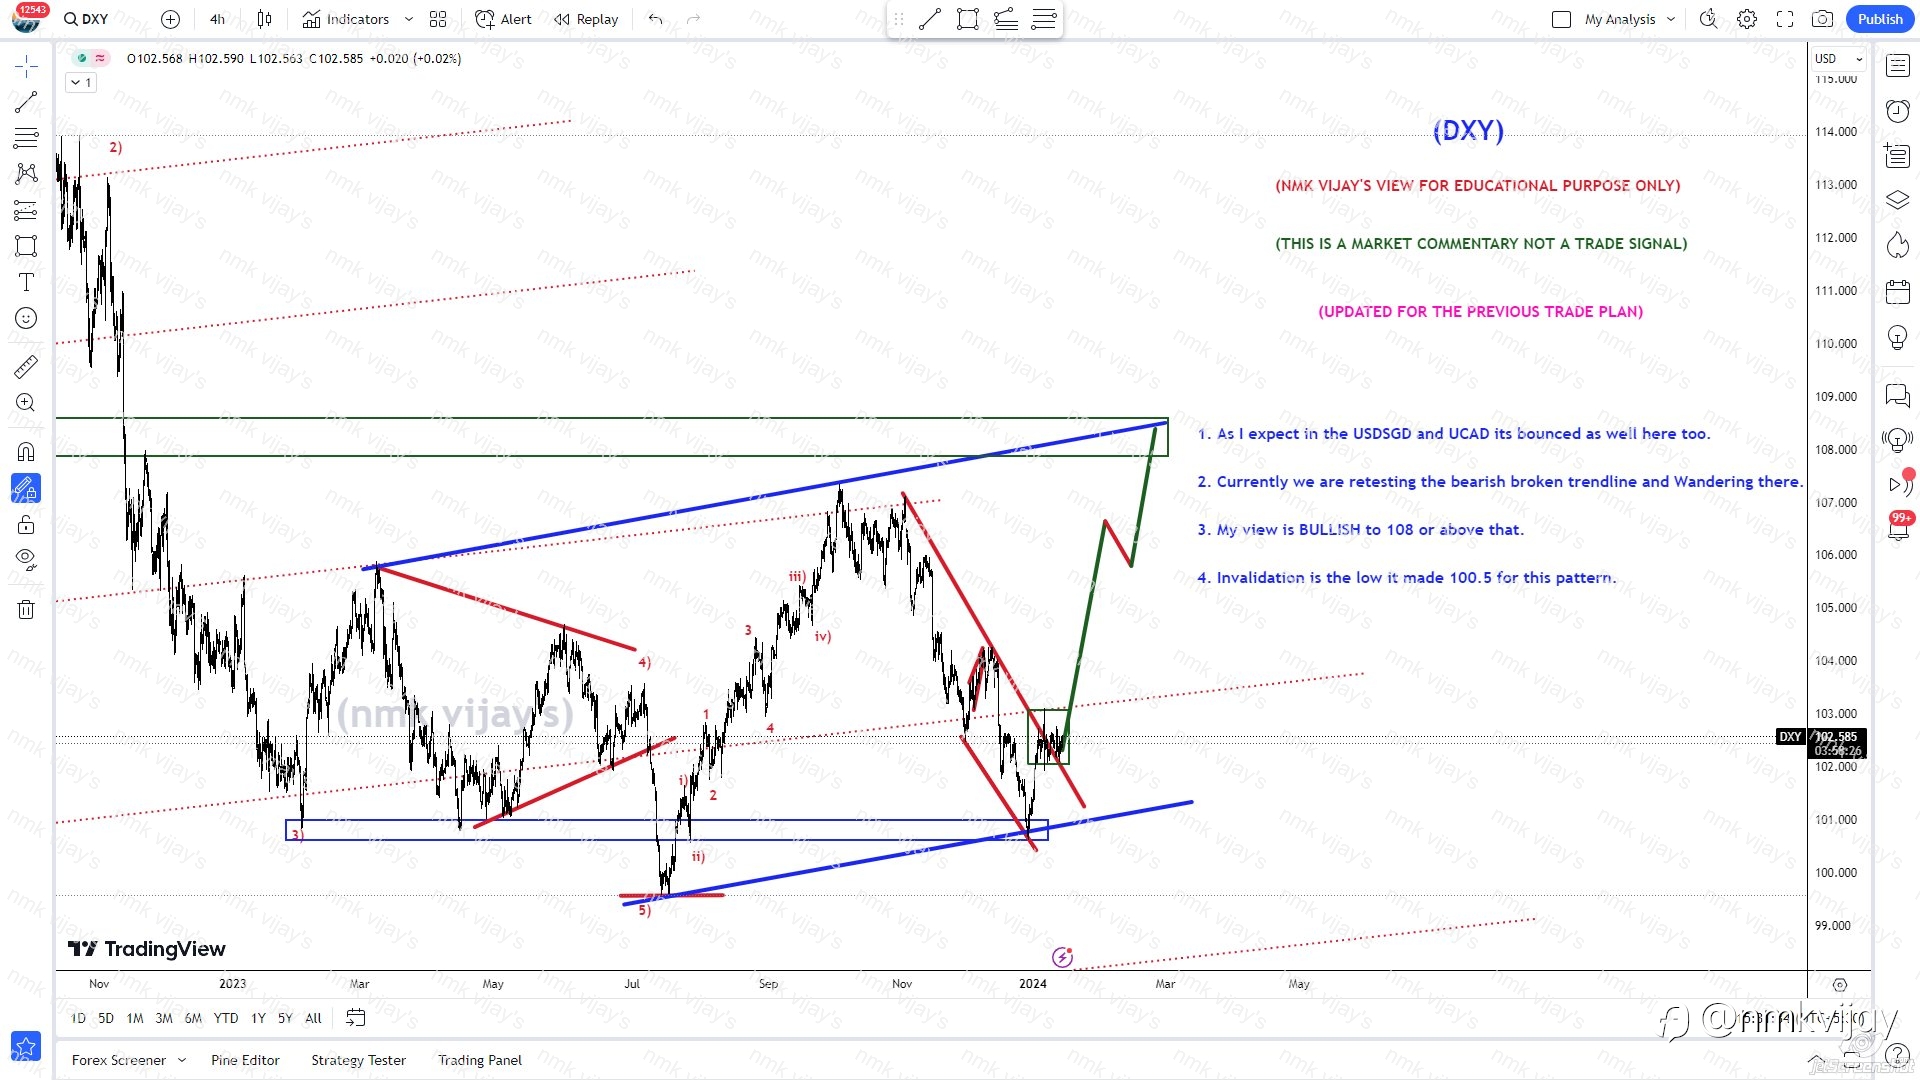 DXY-Target 108 and above. Invalidation 100.5